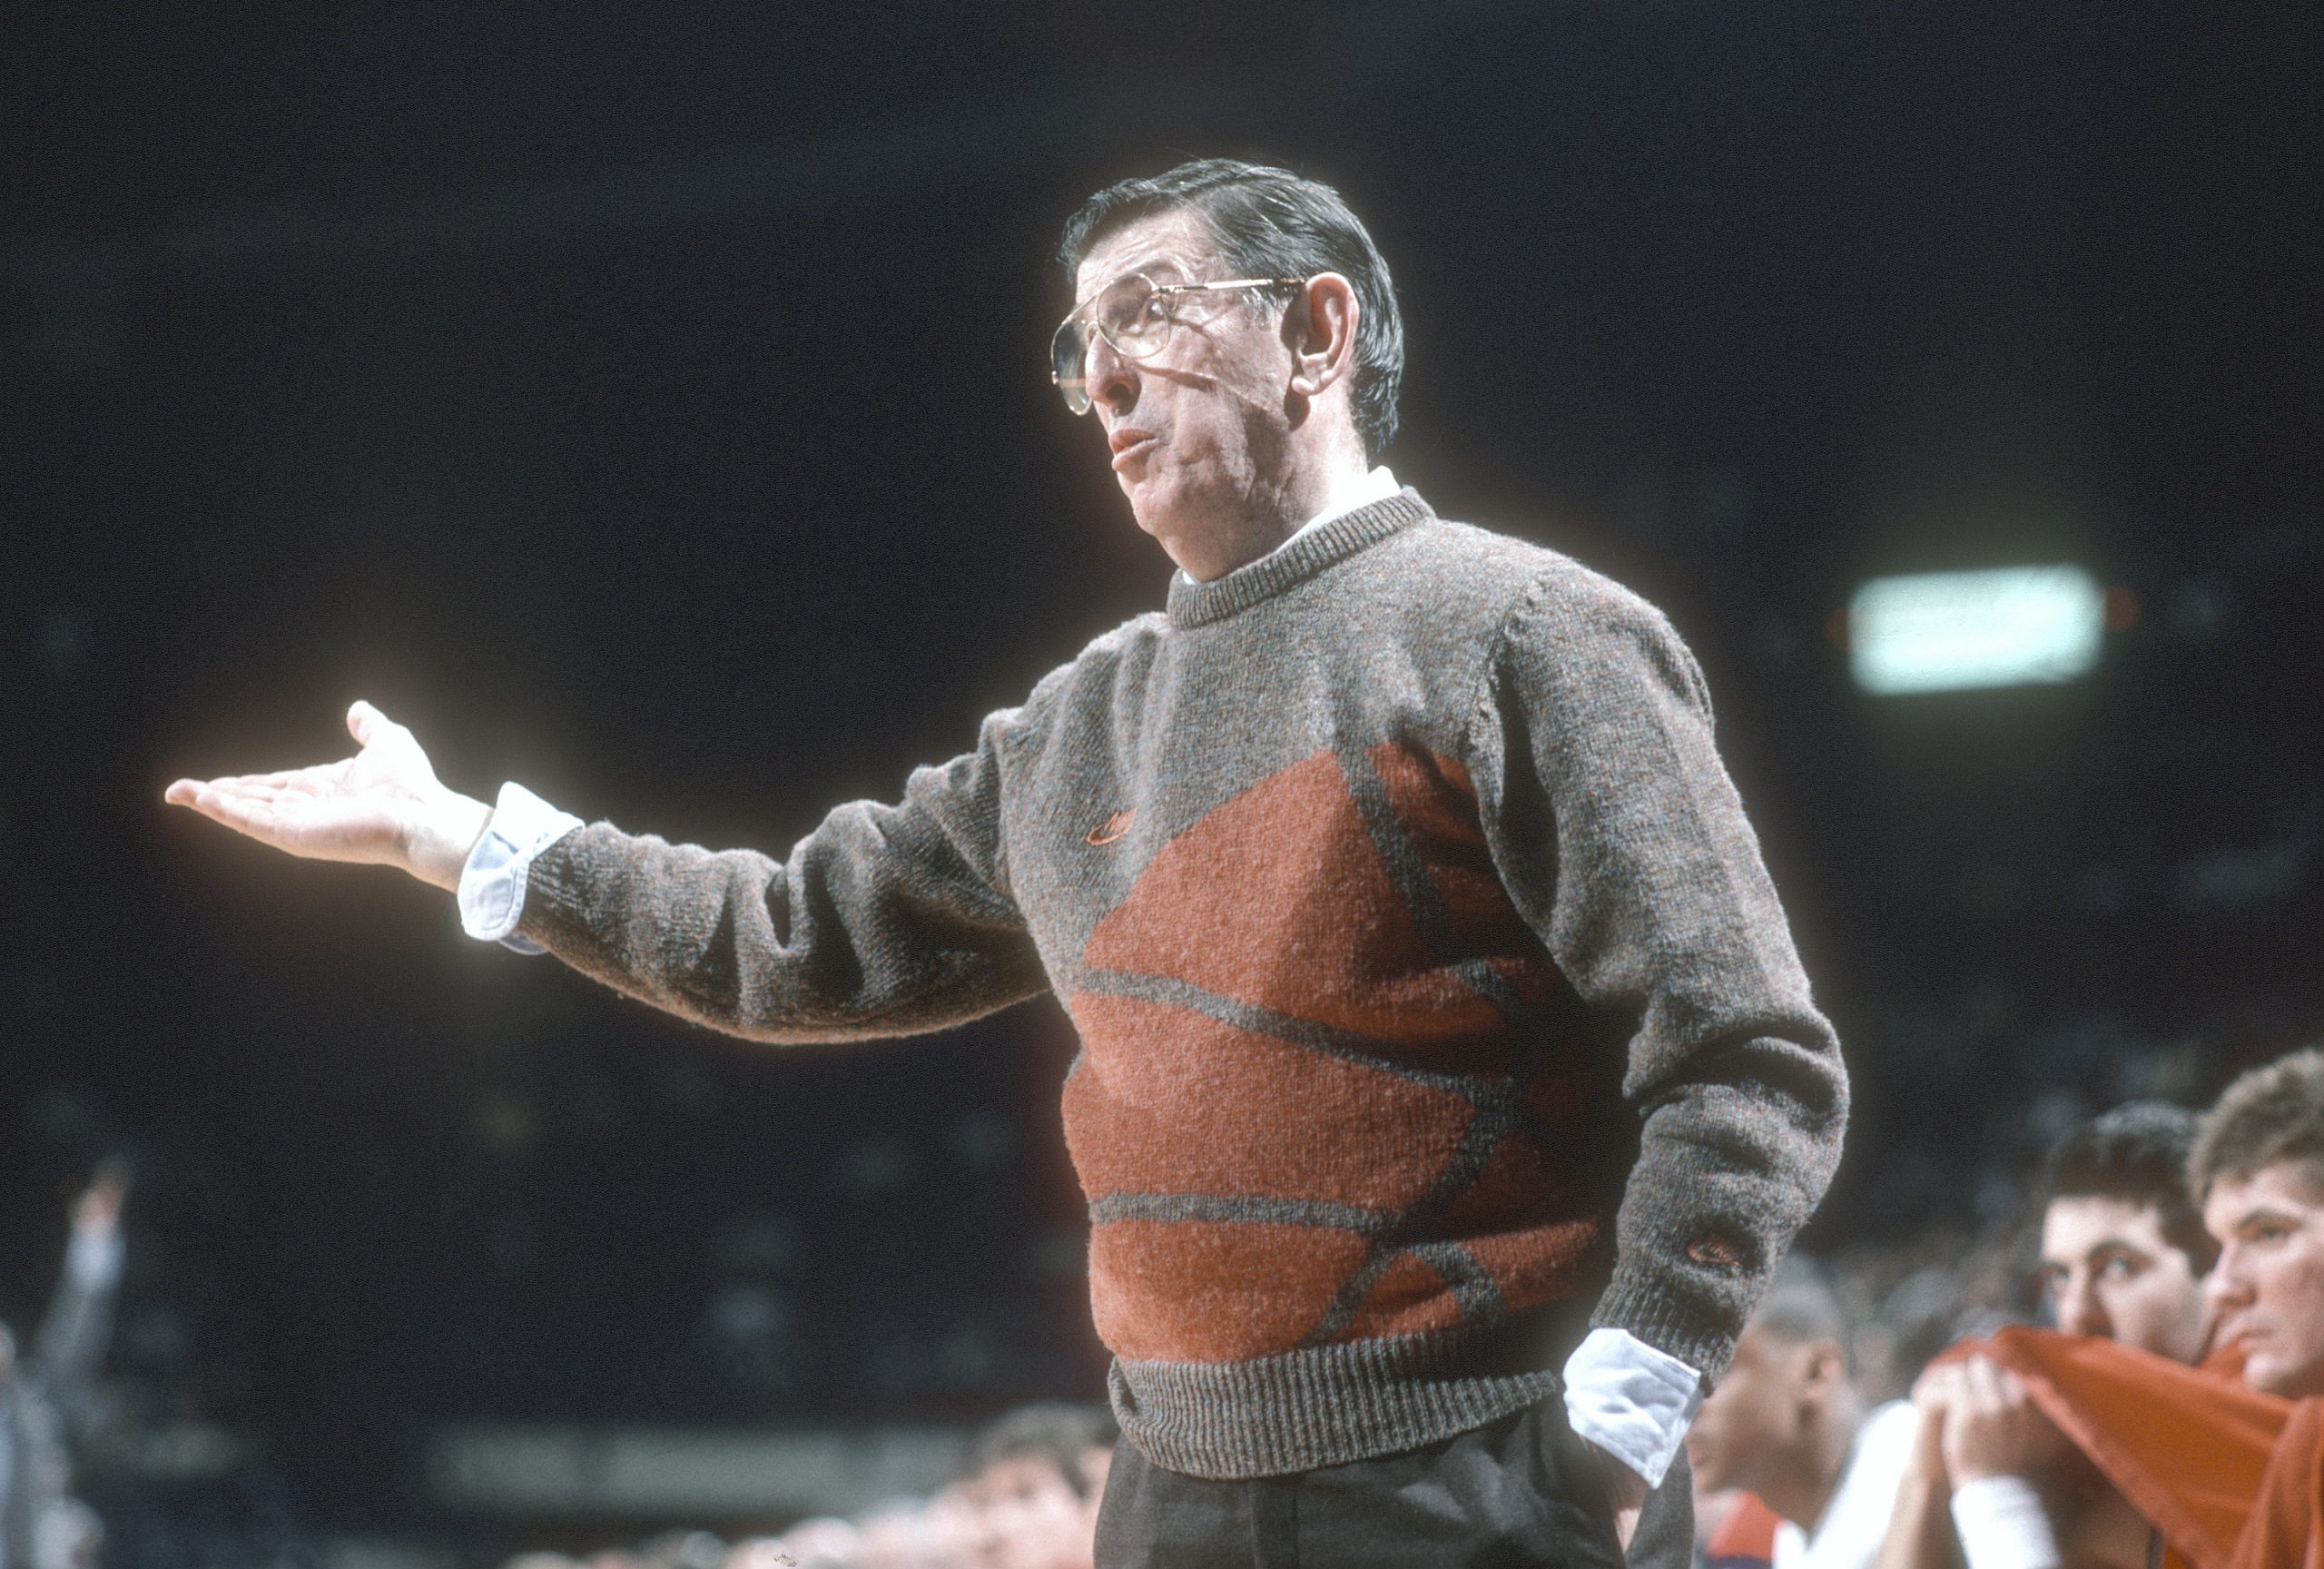 Lou Carnesecca, Inducted into the NYC Hall of Fame in 1993